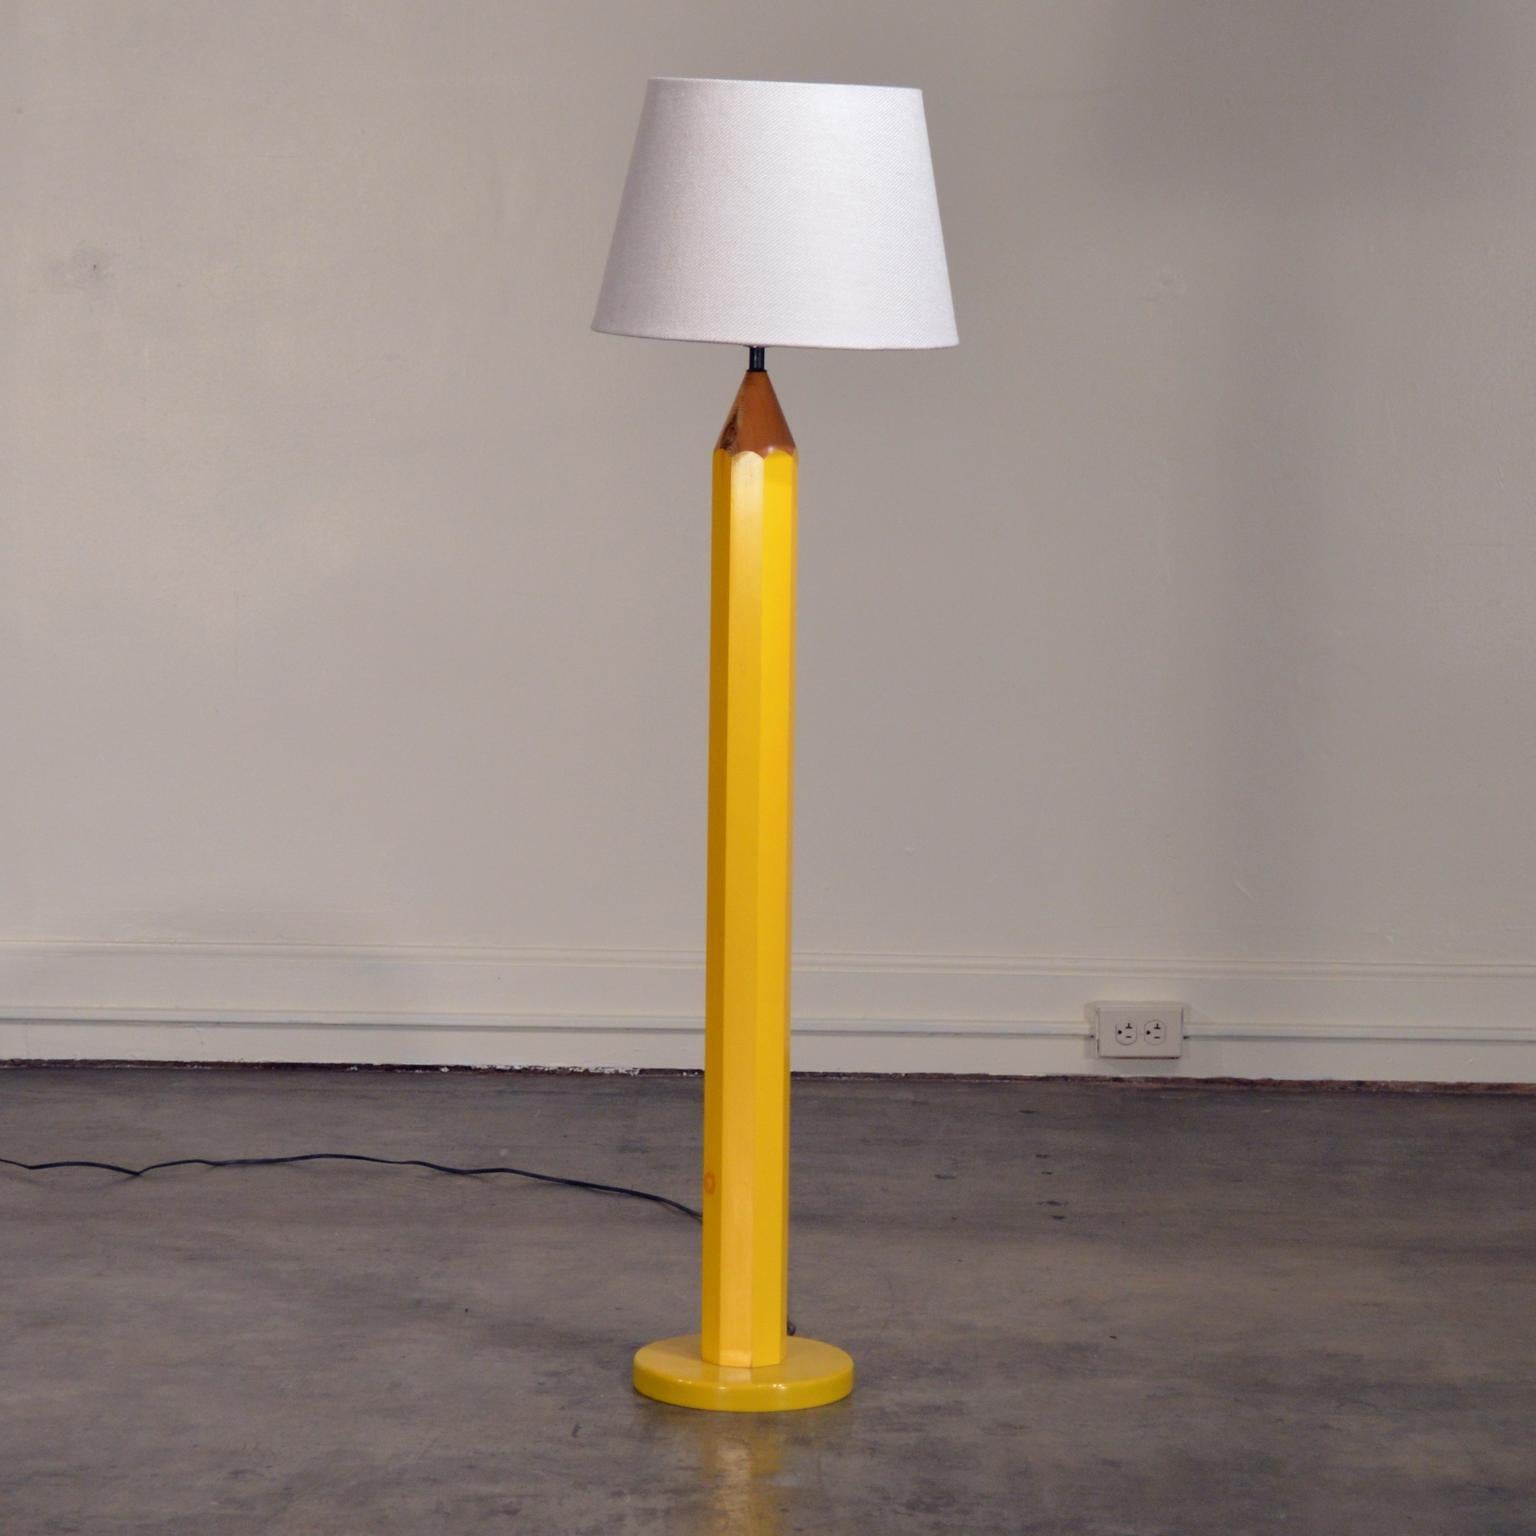 This playful Postmodern floor lamp is designed to resemble pencil with tip pointed upward. Painted pine wood, resembles a standard No. 2 pencil.

Marked as created by Lightolier with a sticker on the lamp socket. Height to top of socket is 45